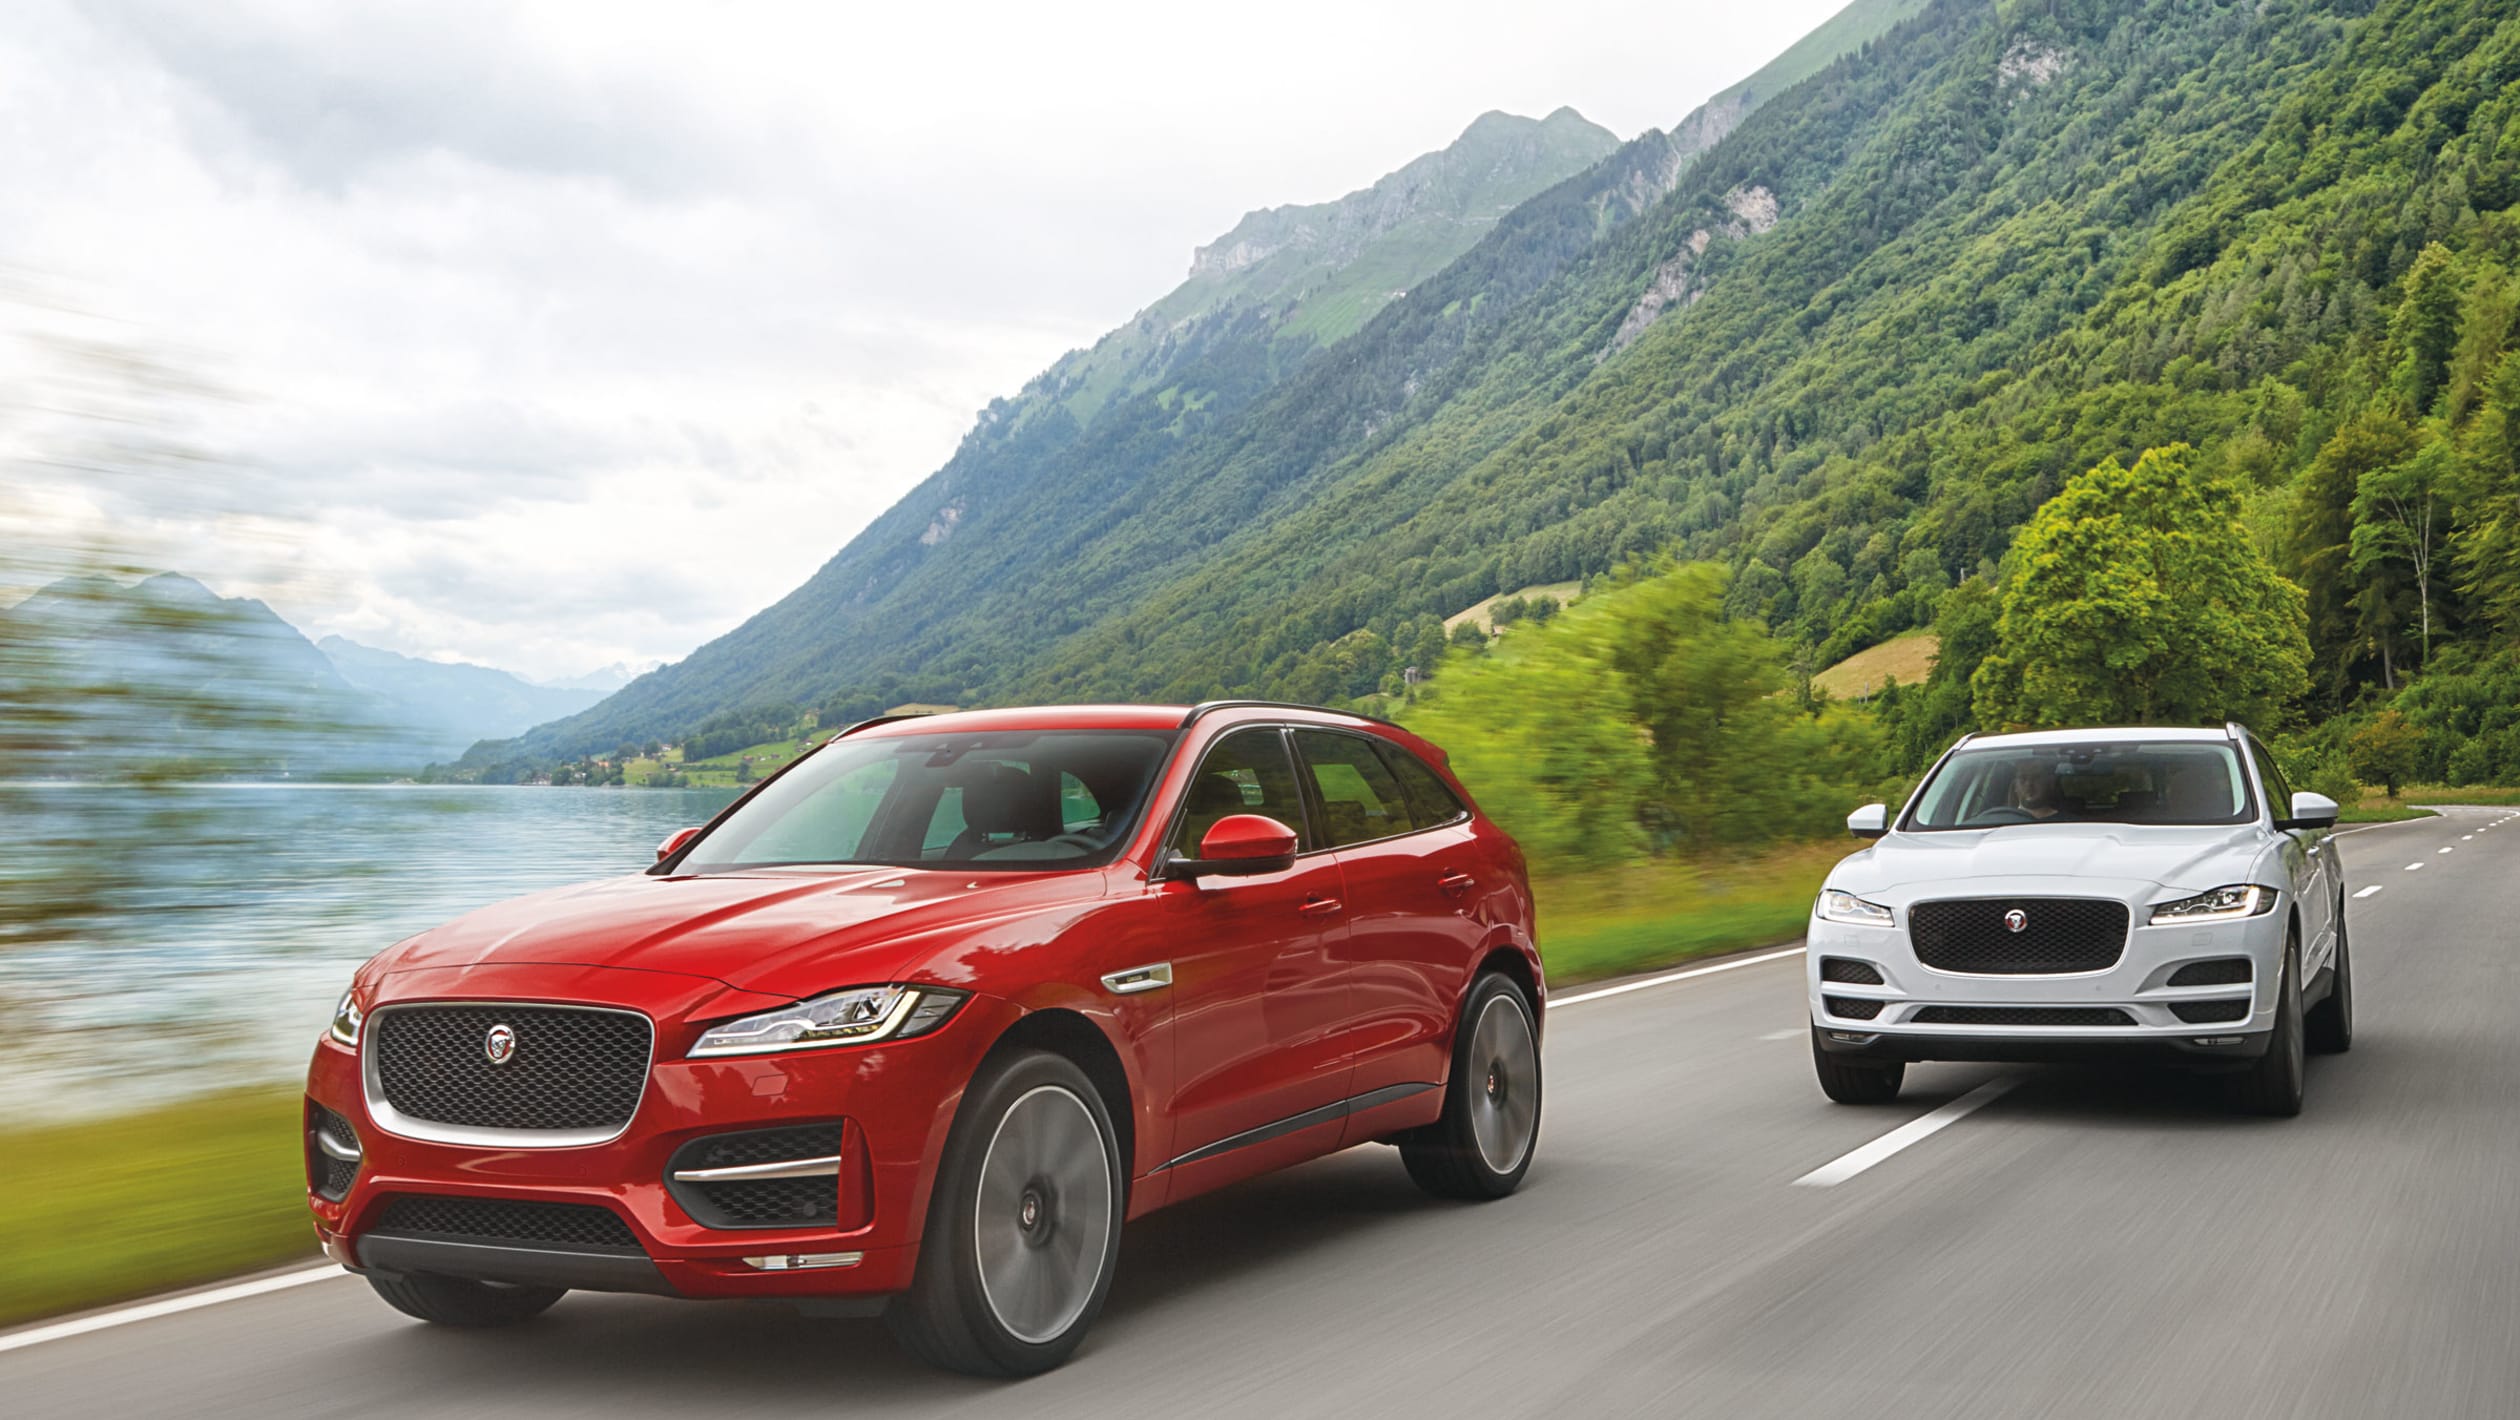 New Jaguar F-Pace revealed - pictures | Auto Express